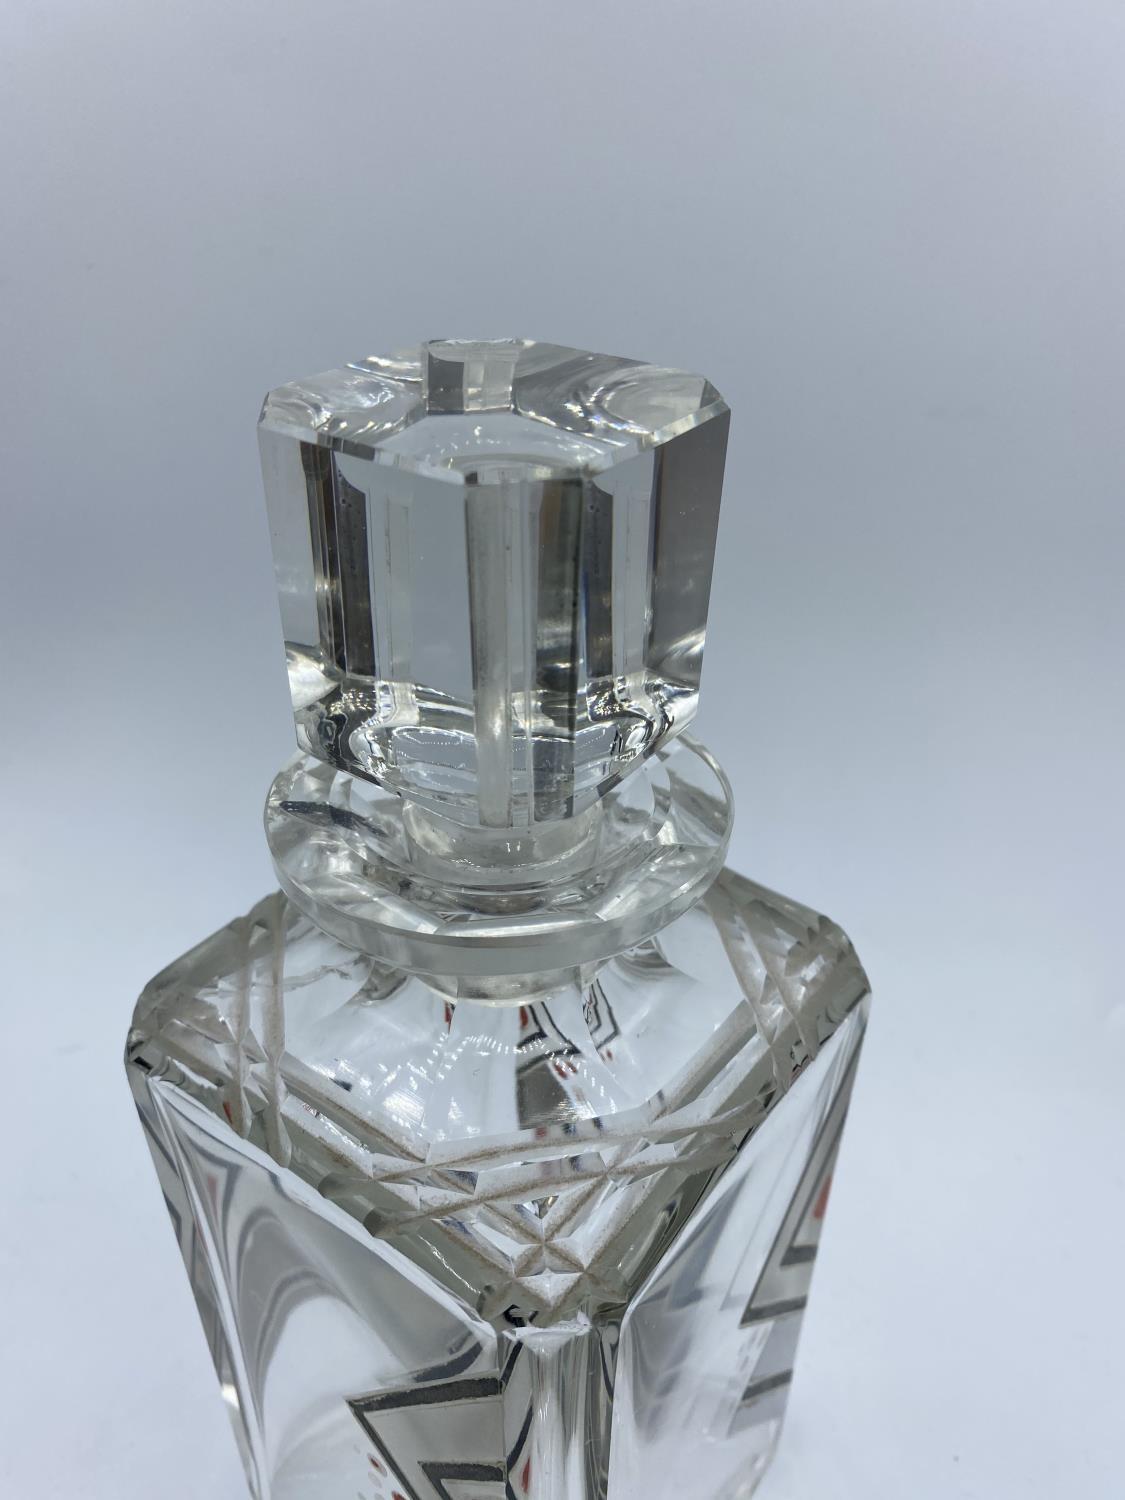 Art deco cut glass decanter with clear glass stopper, 22cm high - Image 2 of 3